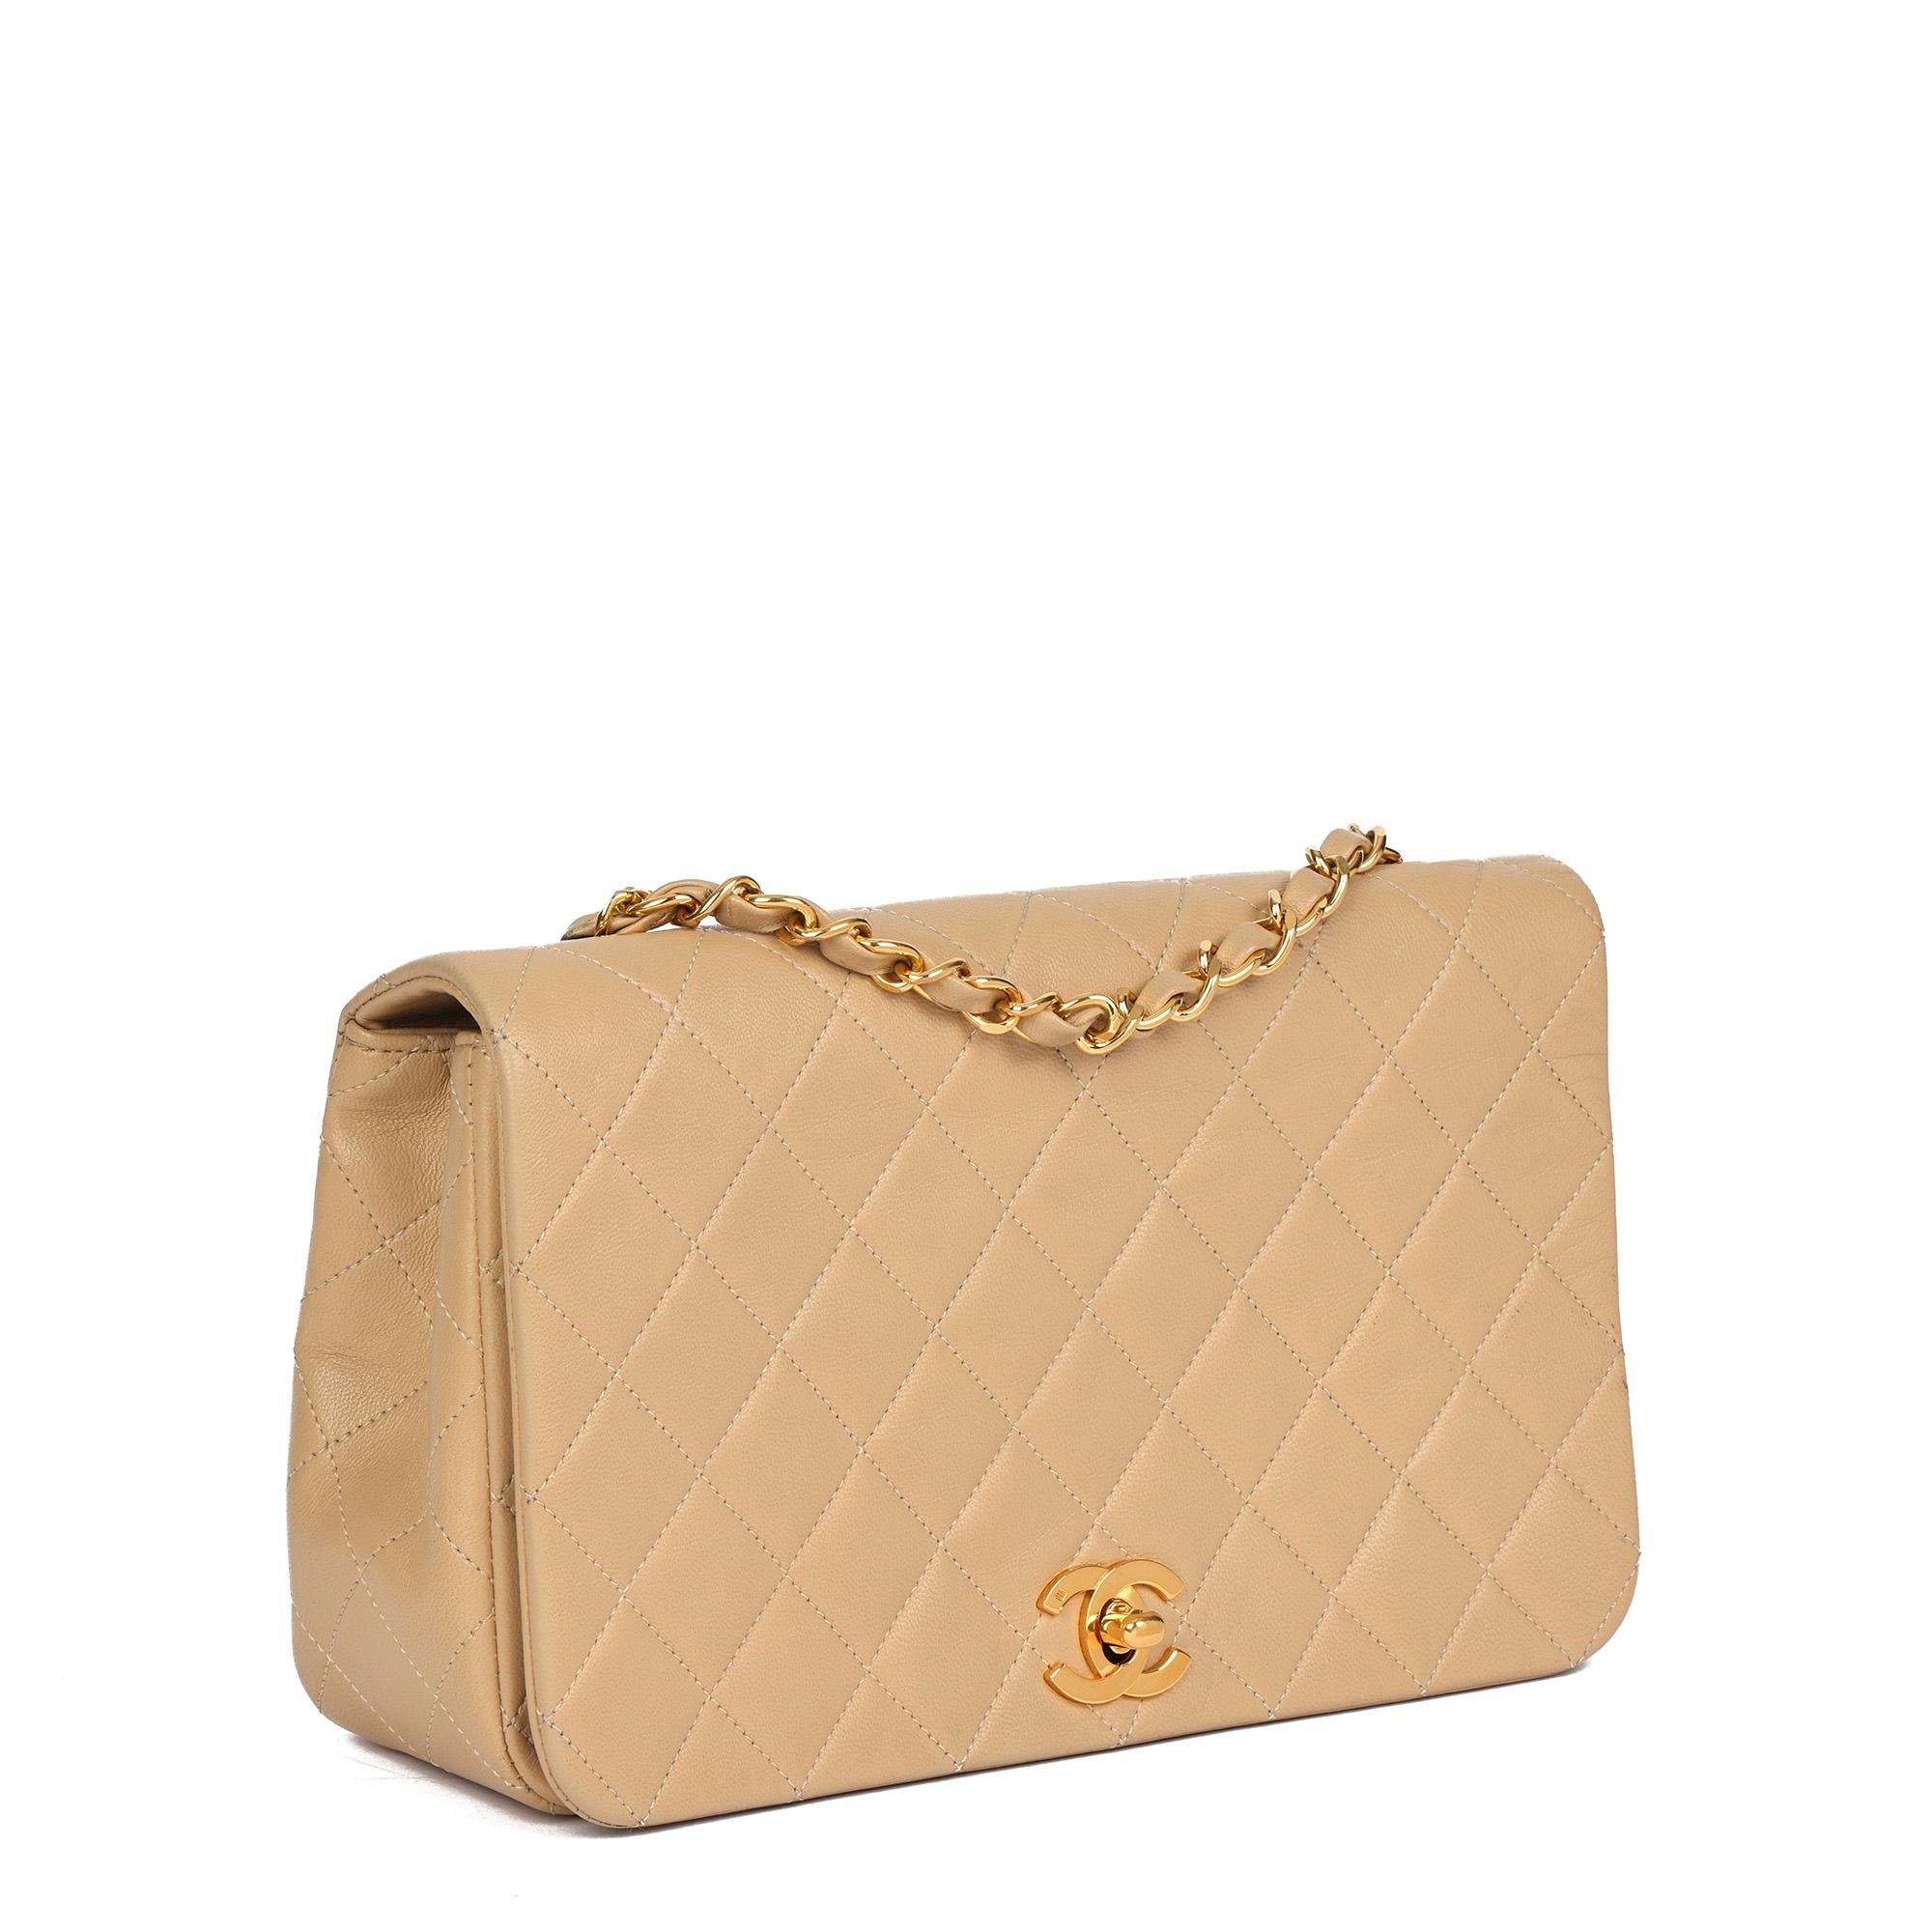 CHANEL
Beige Quilted Lambskin Vintage Small Classic Single Full Flap Bag 

Serial Number: 1618471
Age (Circa): 1991
Accompanied By: Authenticity Card
Authenticity Details: Authenticity Card, Serial Sticker (Made in France)
Gender: Ladies
Type: